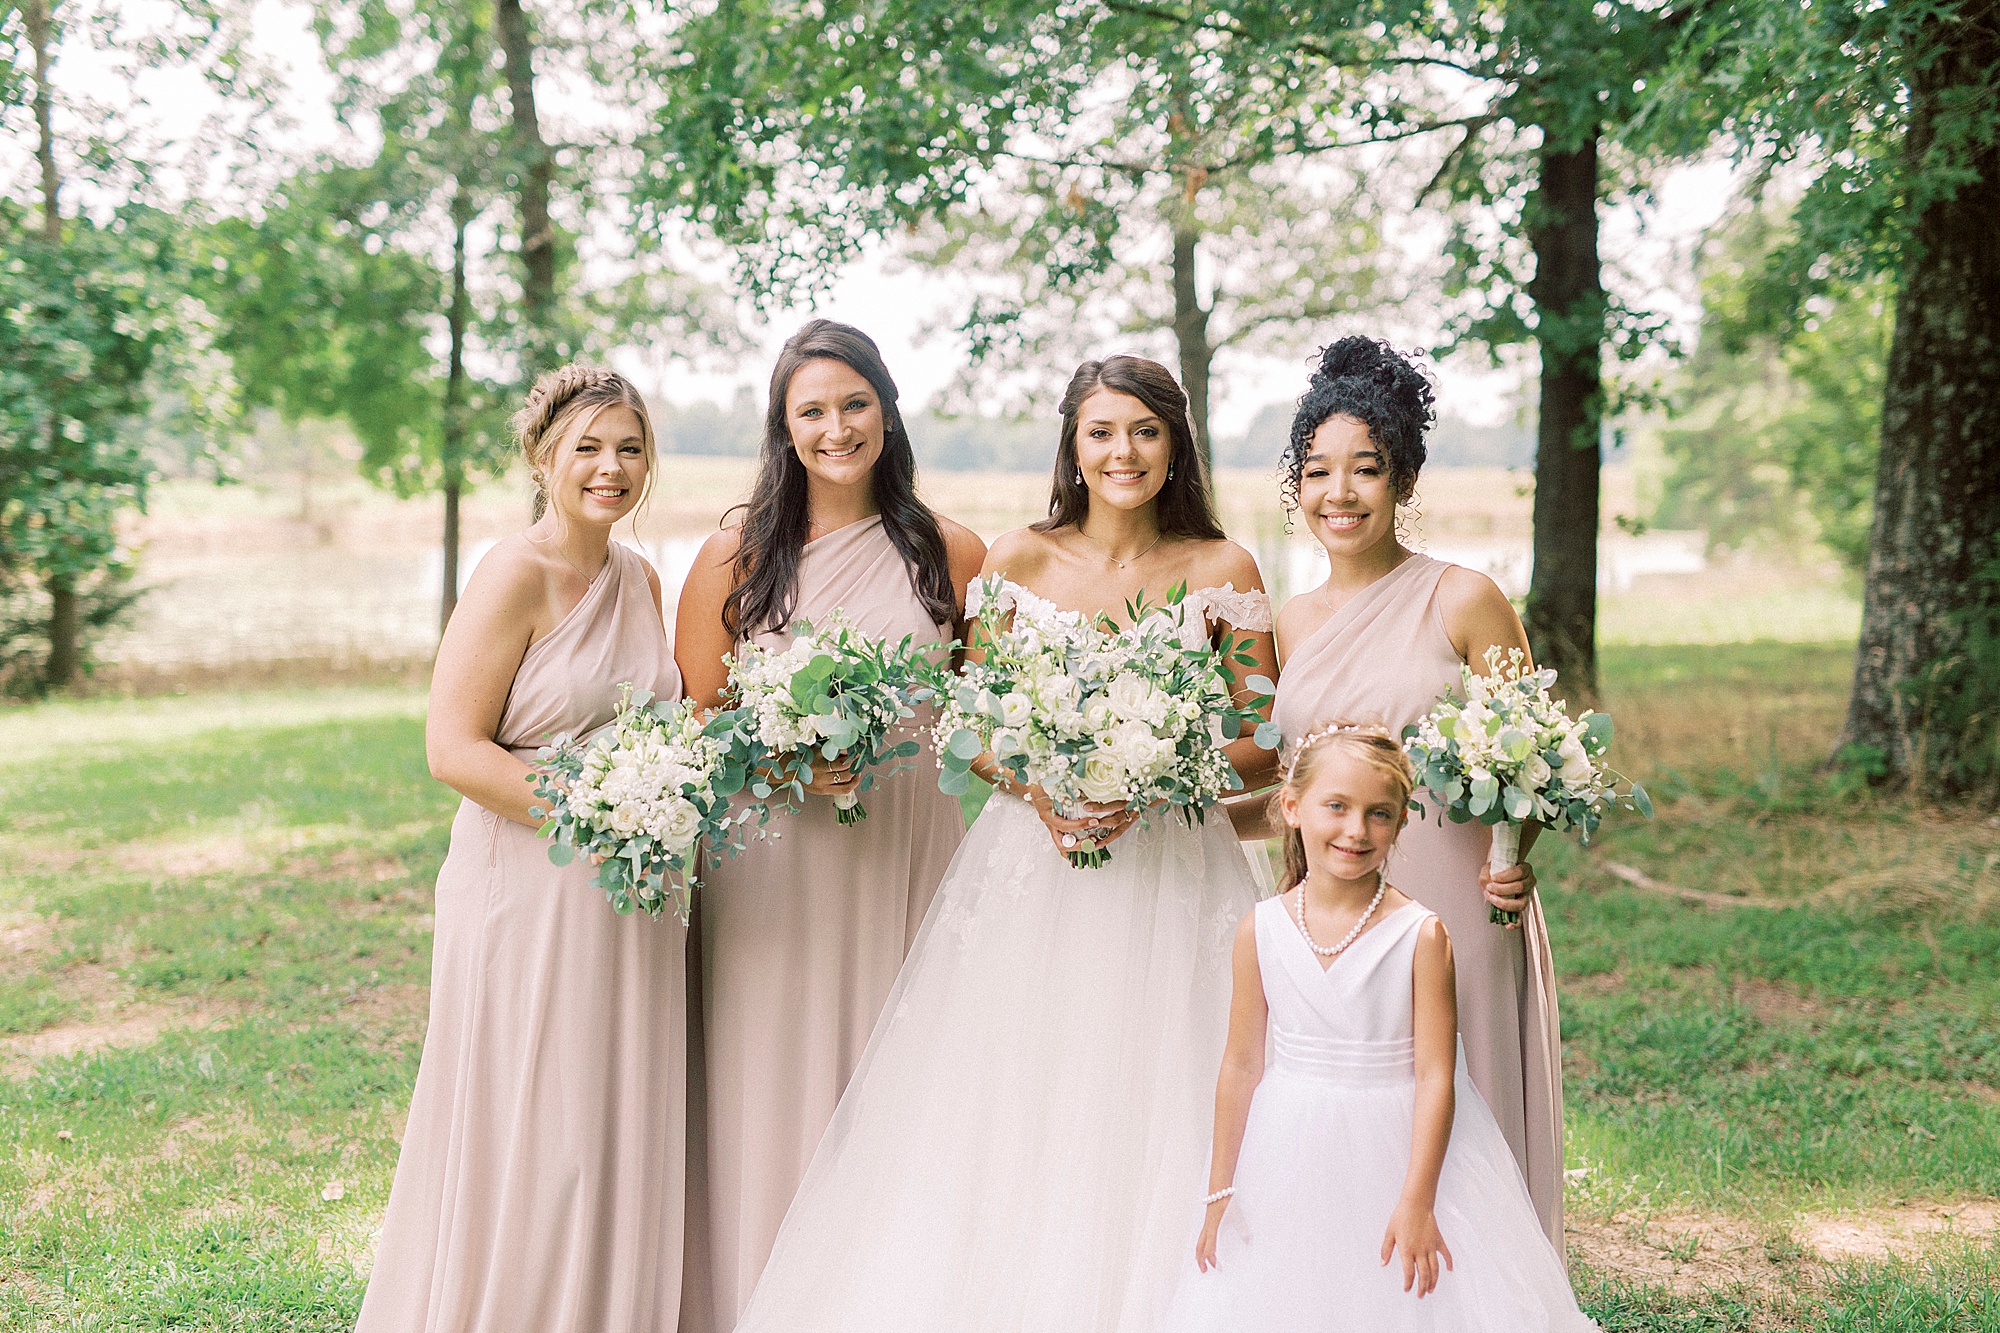 bride and b bridesmaids pose in pink gowns